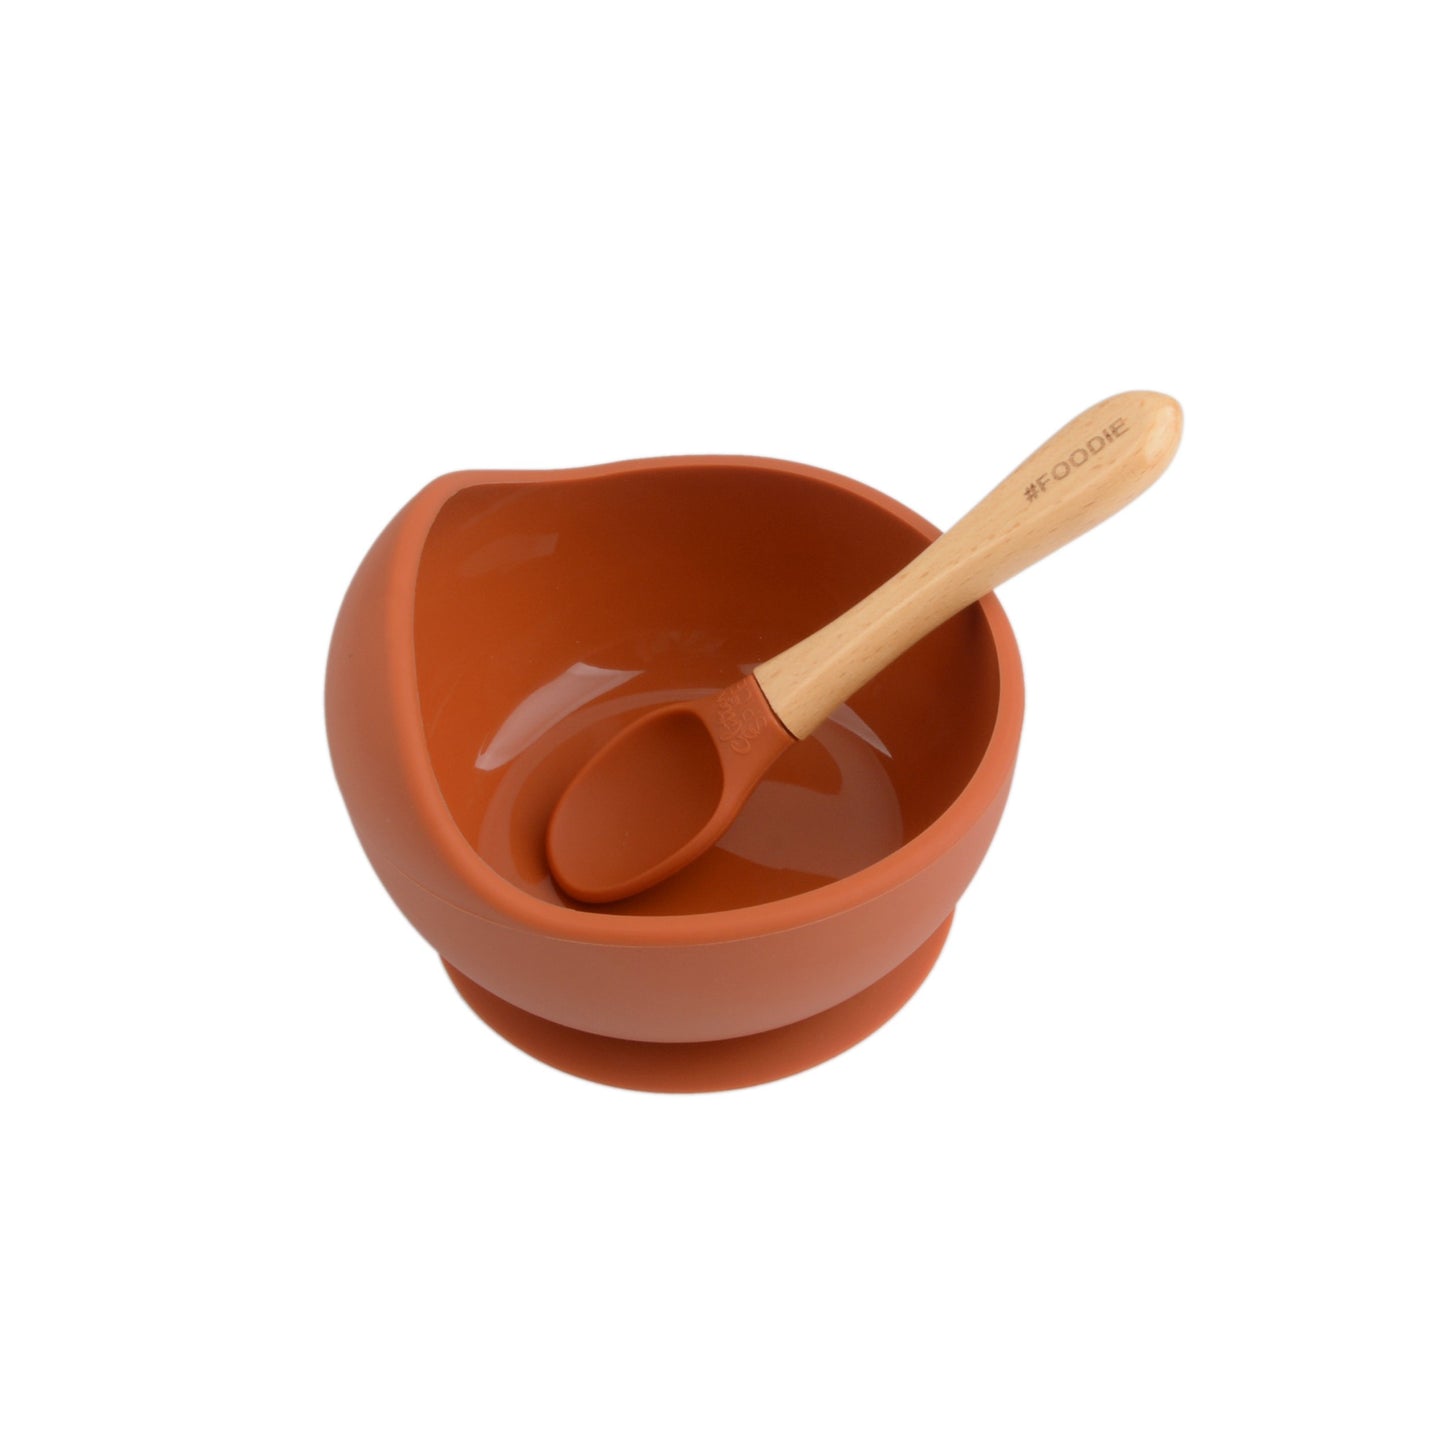 Glitter & Spice Silicone Bowl and Spoon Set